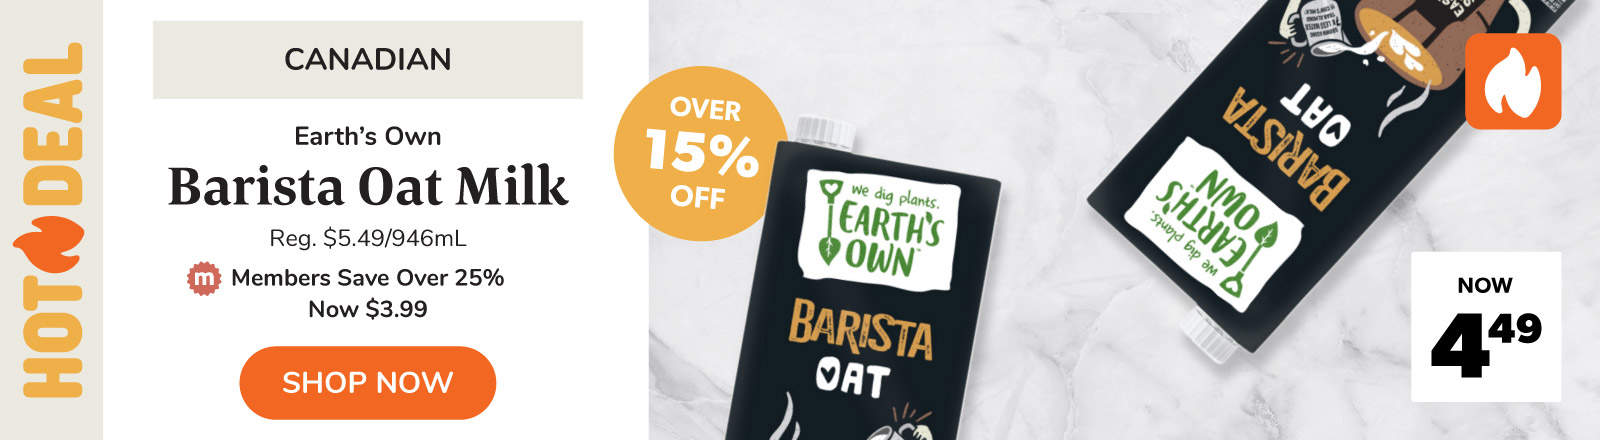 Over 15% off this week only on Barista oat milk! 